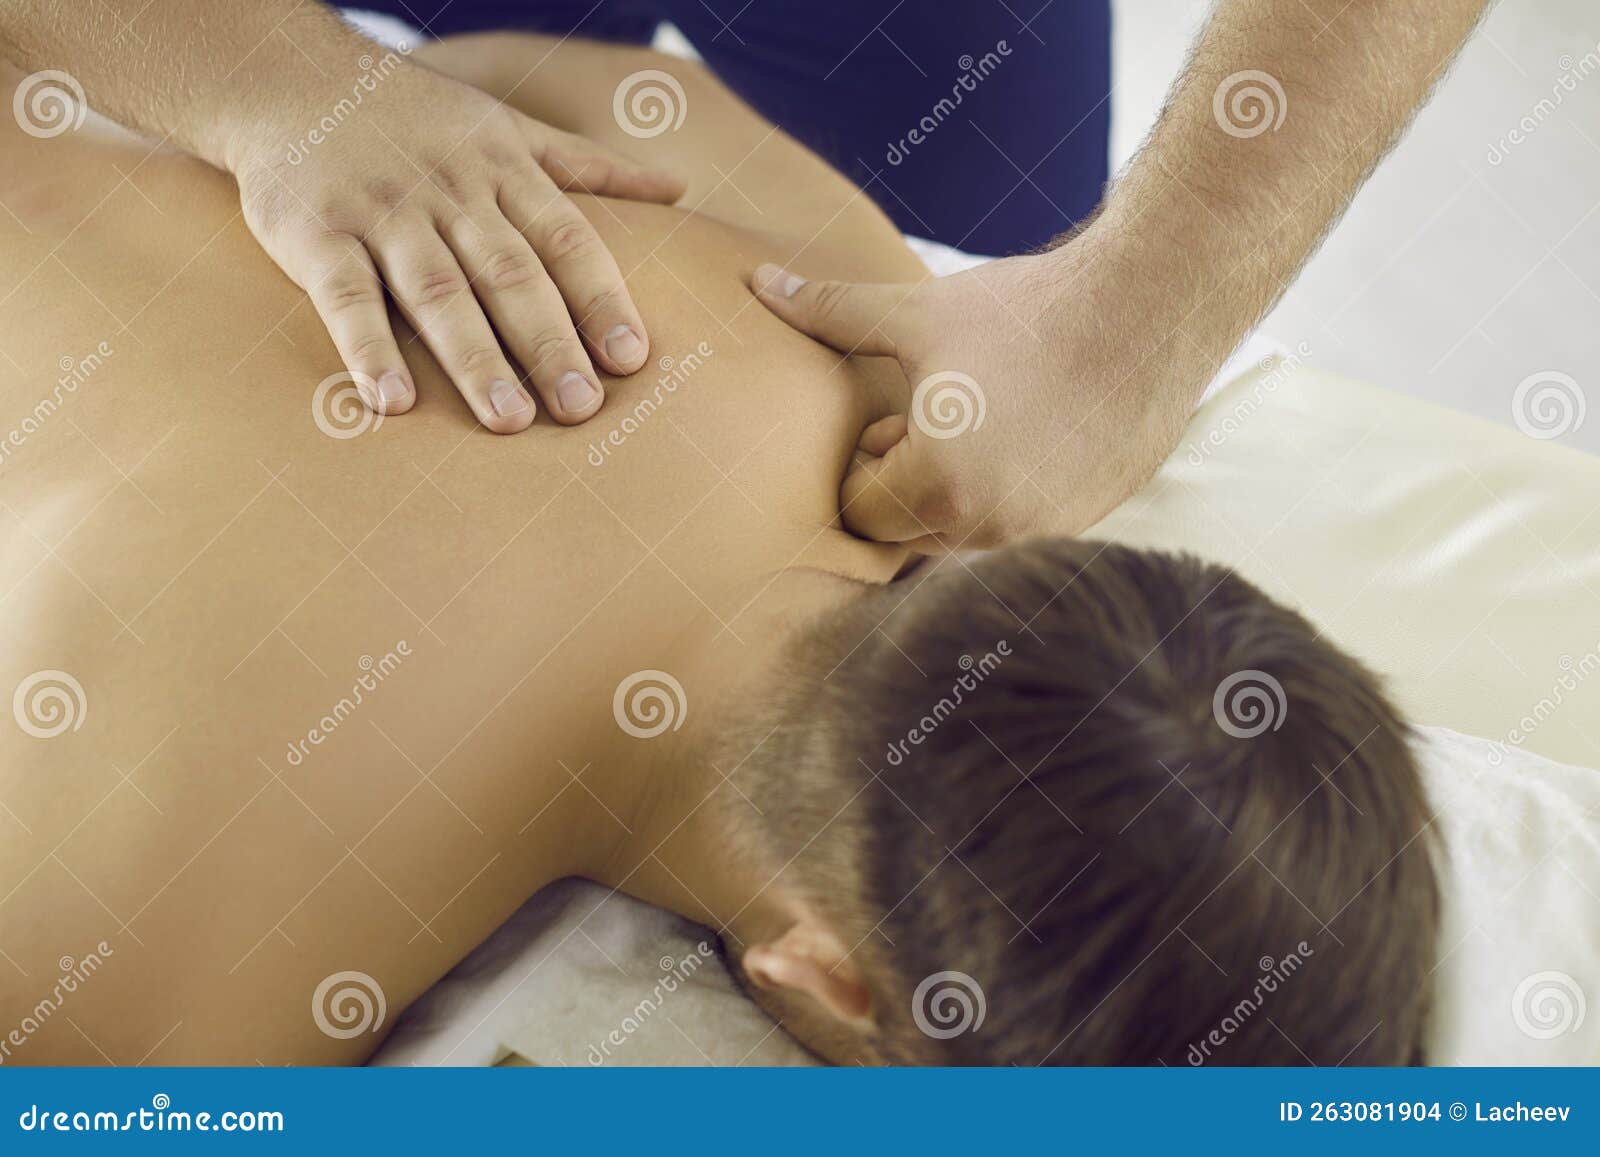 man enjoying relaxing, remedial back massage done by professional masseur at massage room